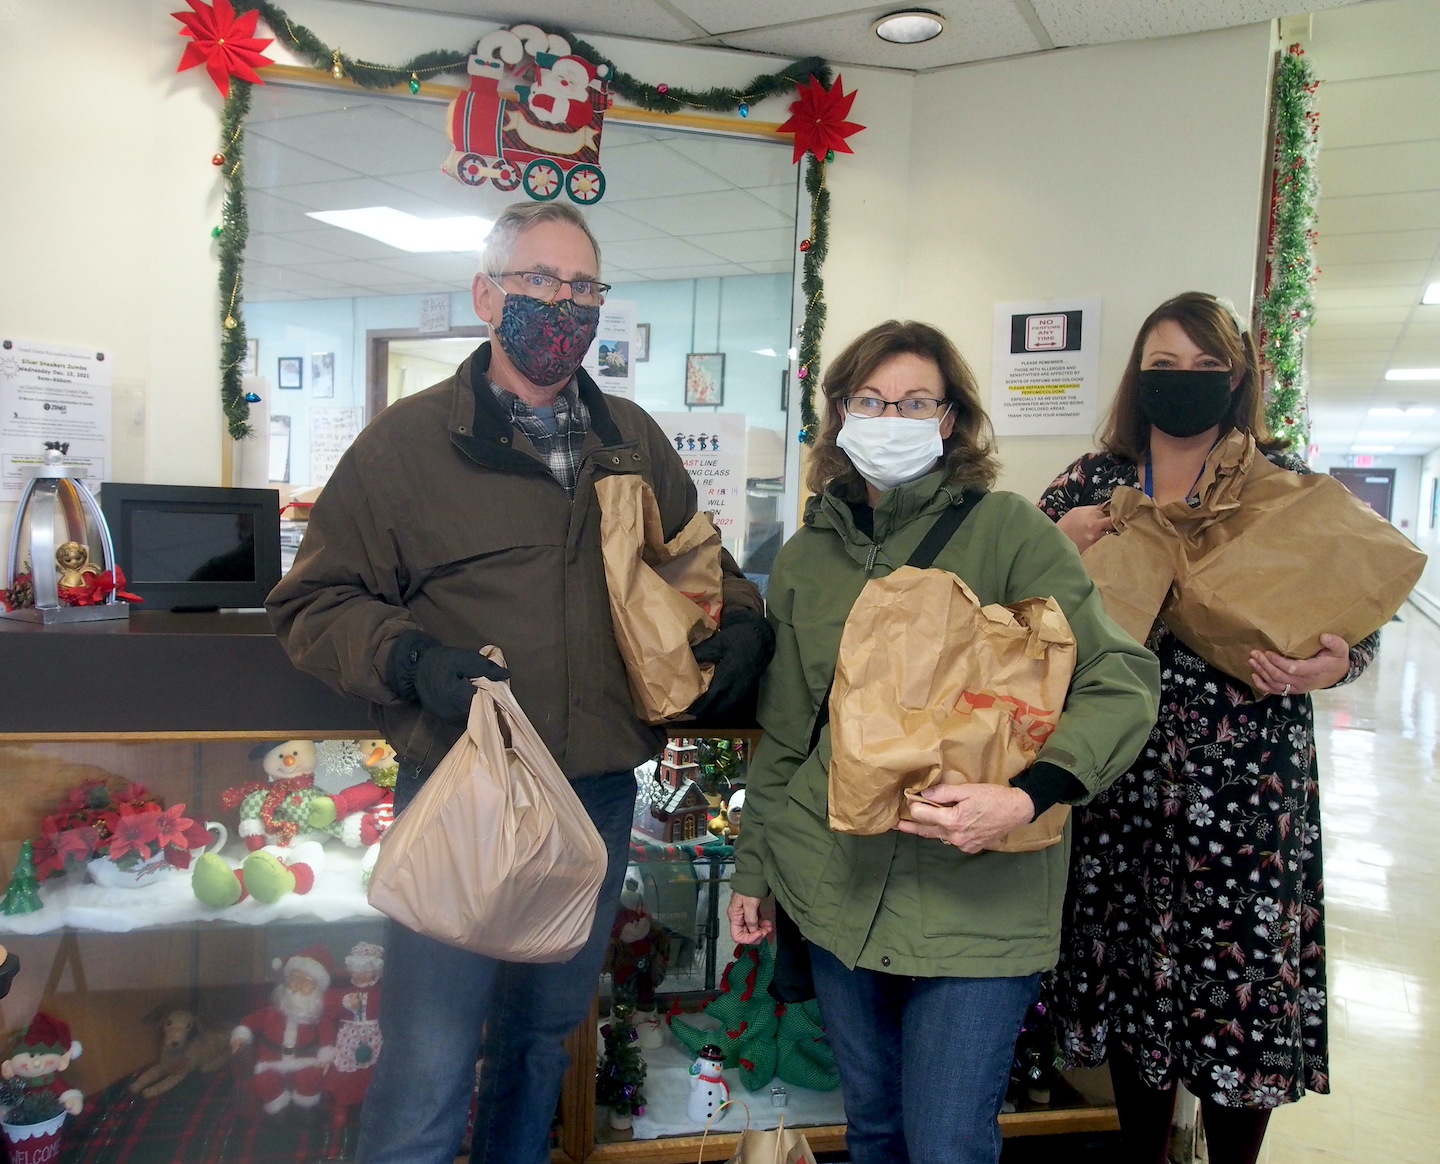 Dave and Sally Goris are shown with donations from the Grand Island Golden Age Center, along with Recreation Supervisor Jen Menter. (Photo by Alice E. Gerard)